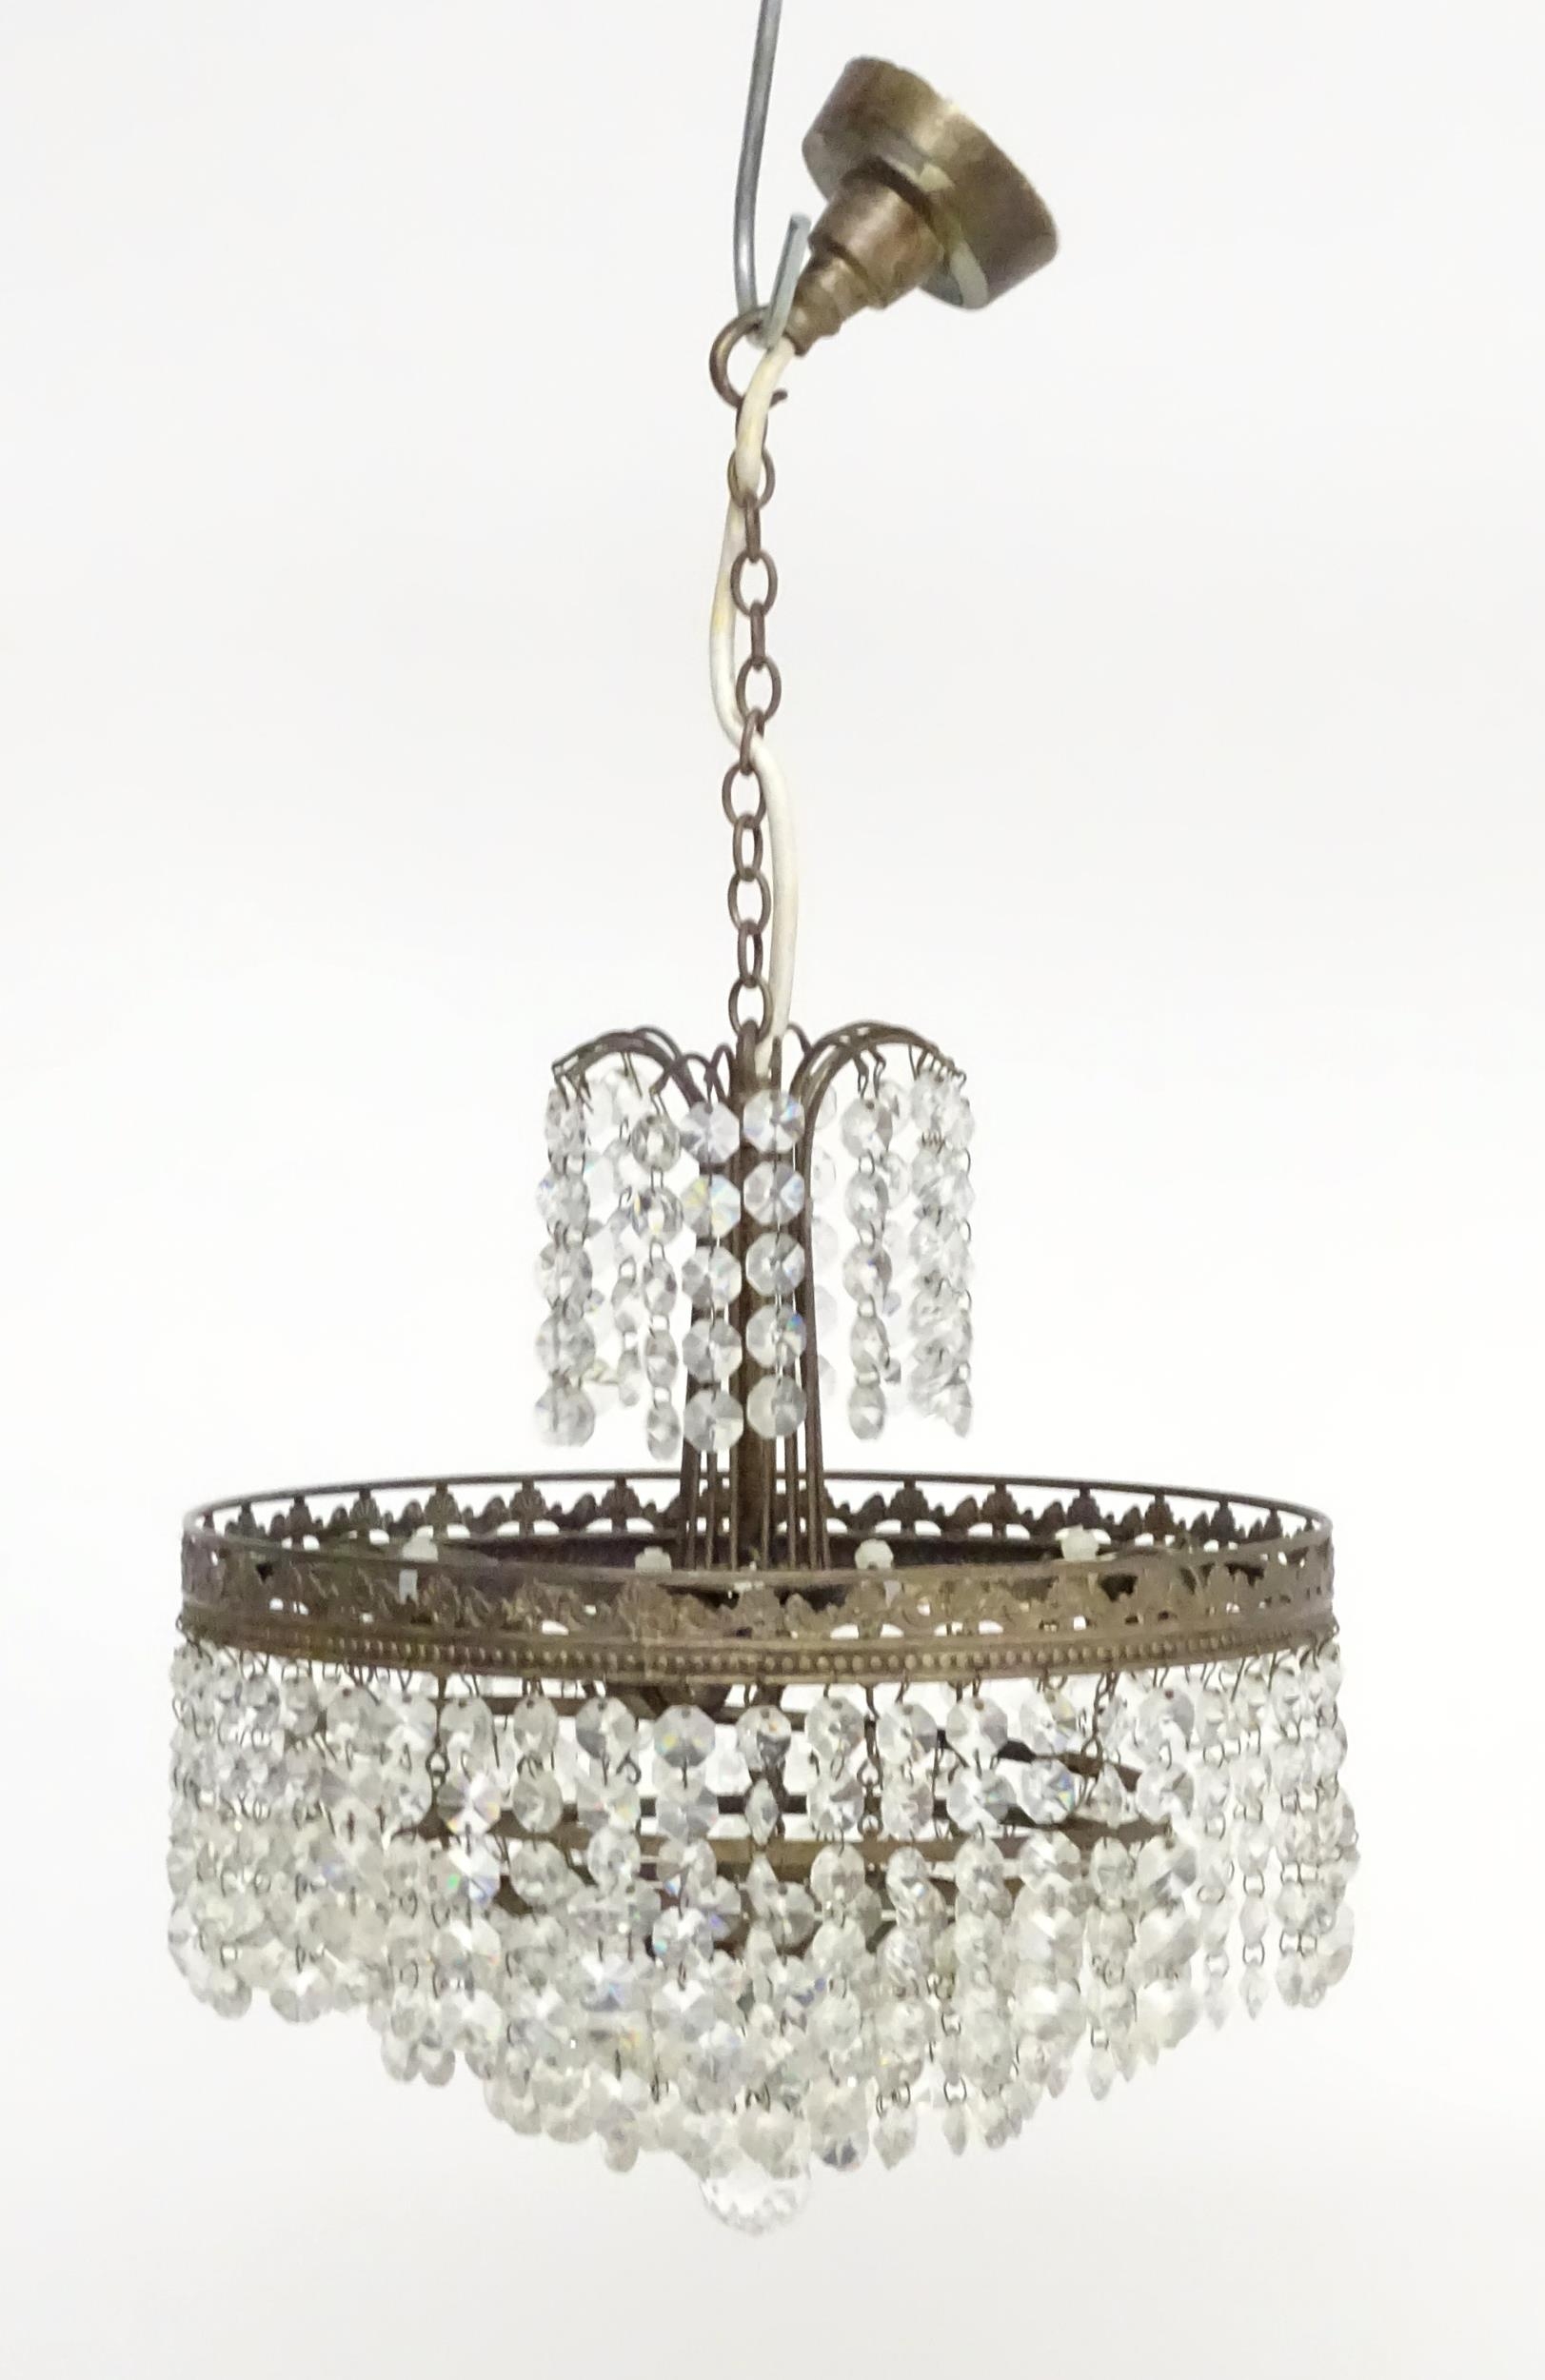 An early 20thC crystal drop bag pendant ceiling light, the chain supporting brass mounts with a - Image 2 of 8